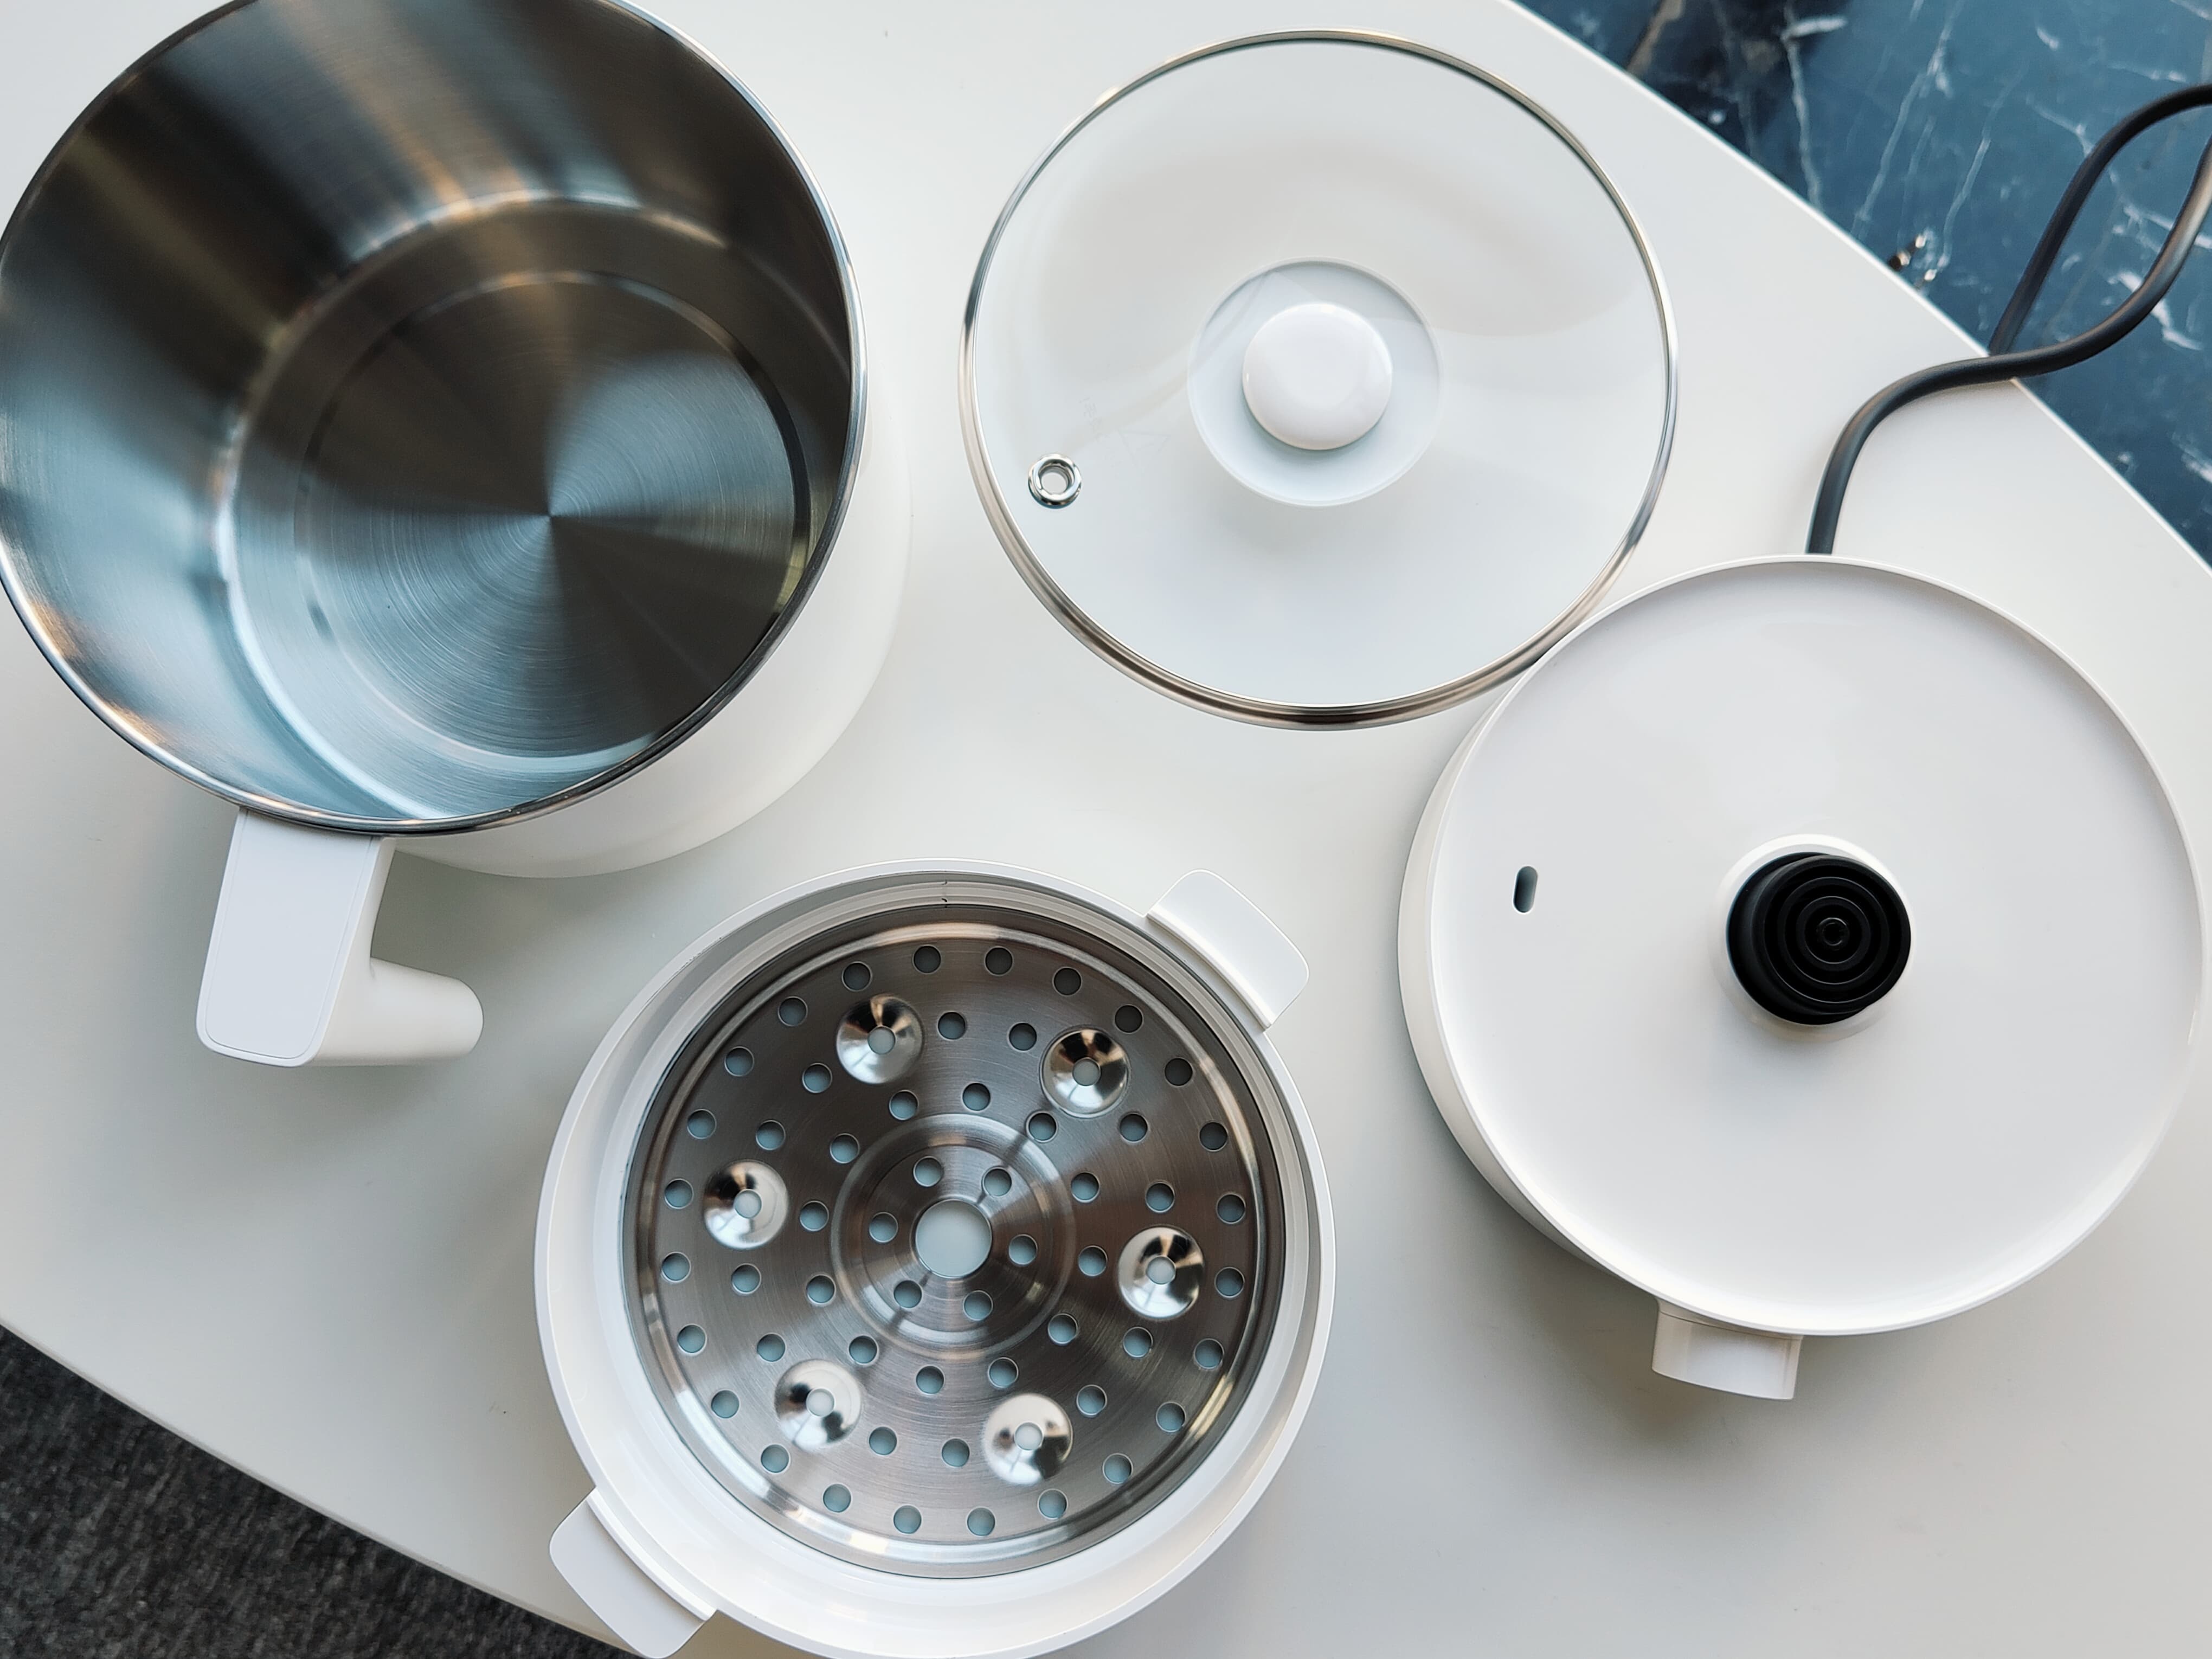 Unboxing of Mijia Smart Multi-function Cooking Pot: Eating a good bowl of rice is very important